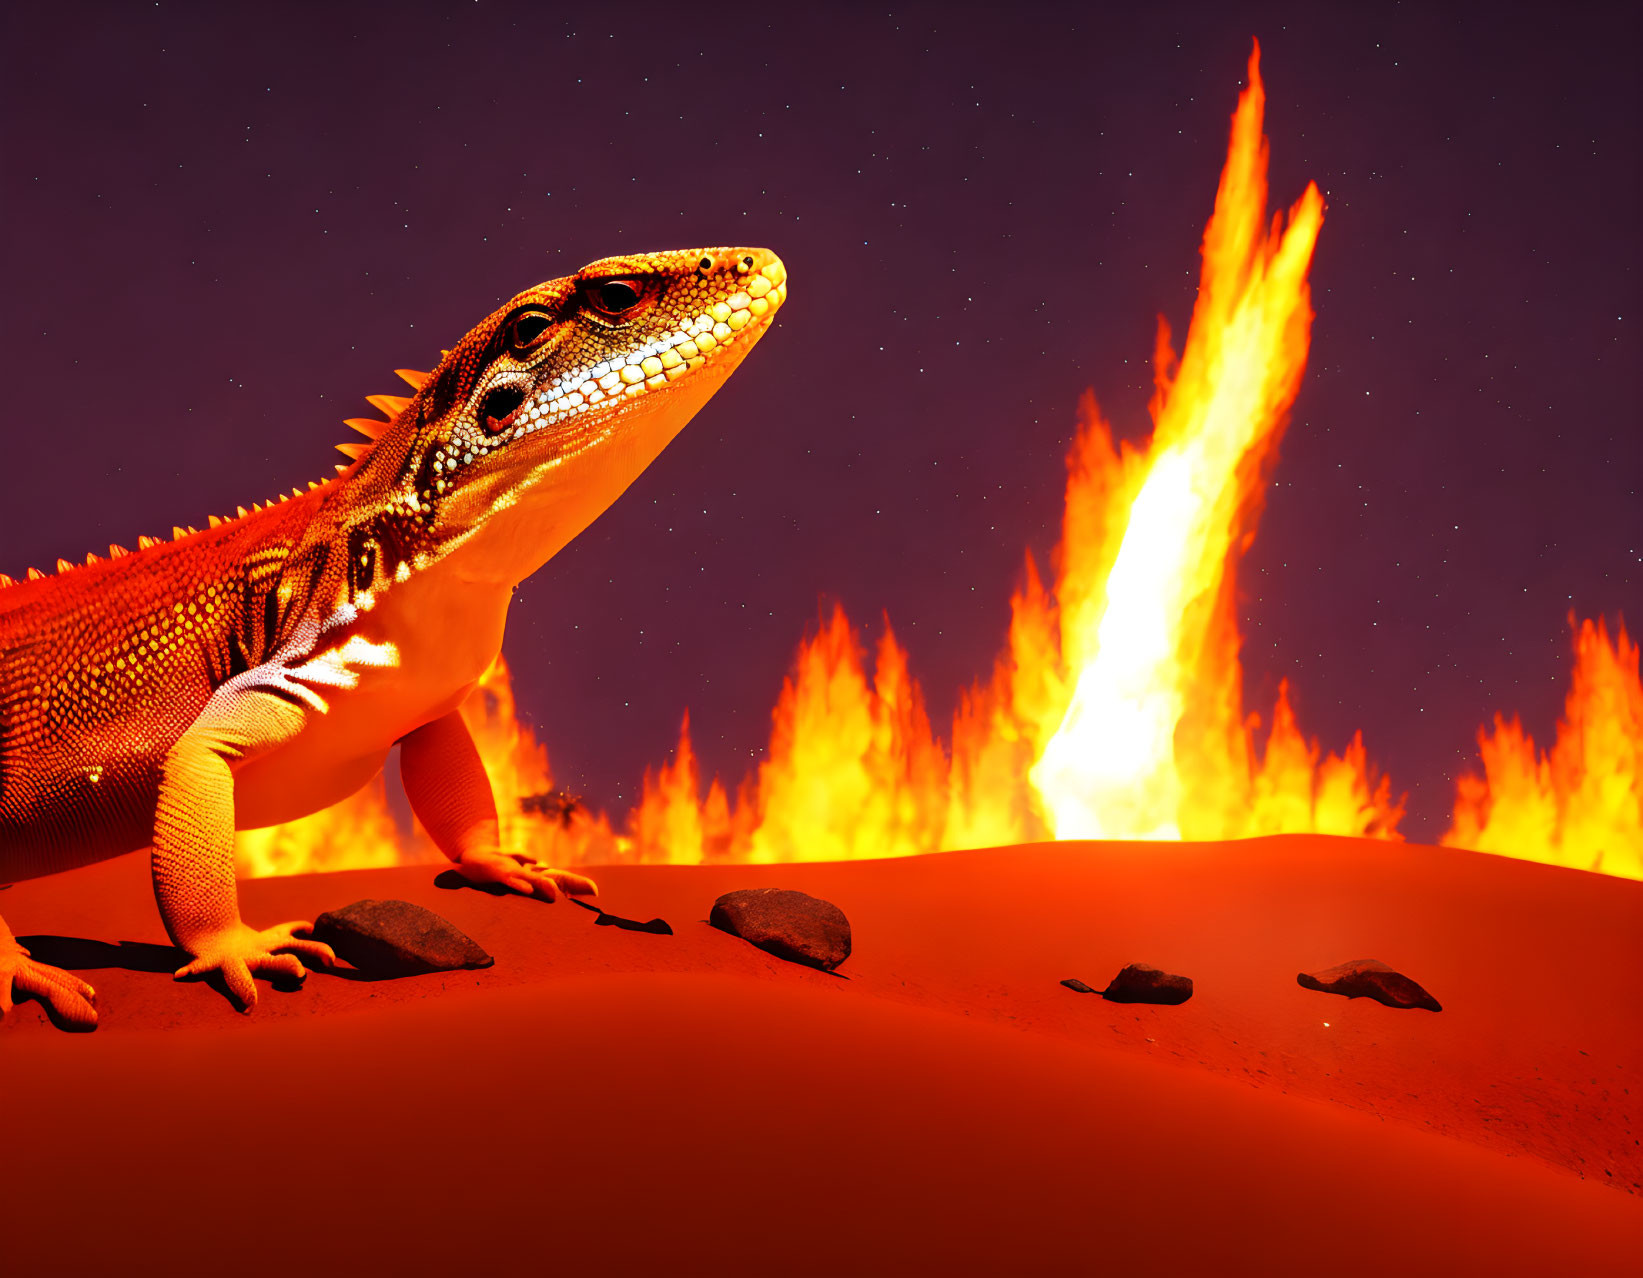 Lizard on Sandy Surface with Orange Flames and Starry Sky